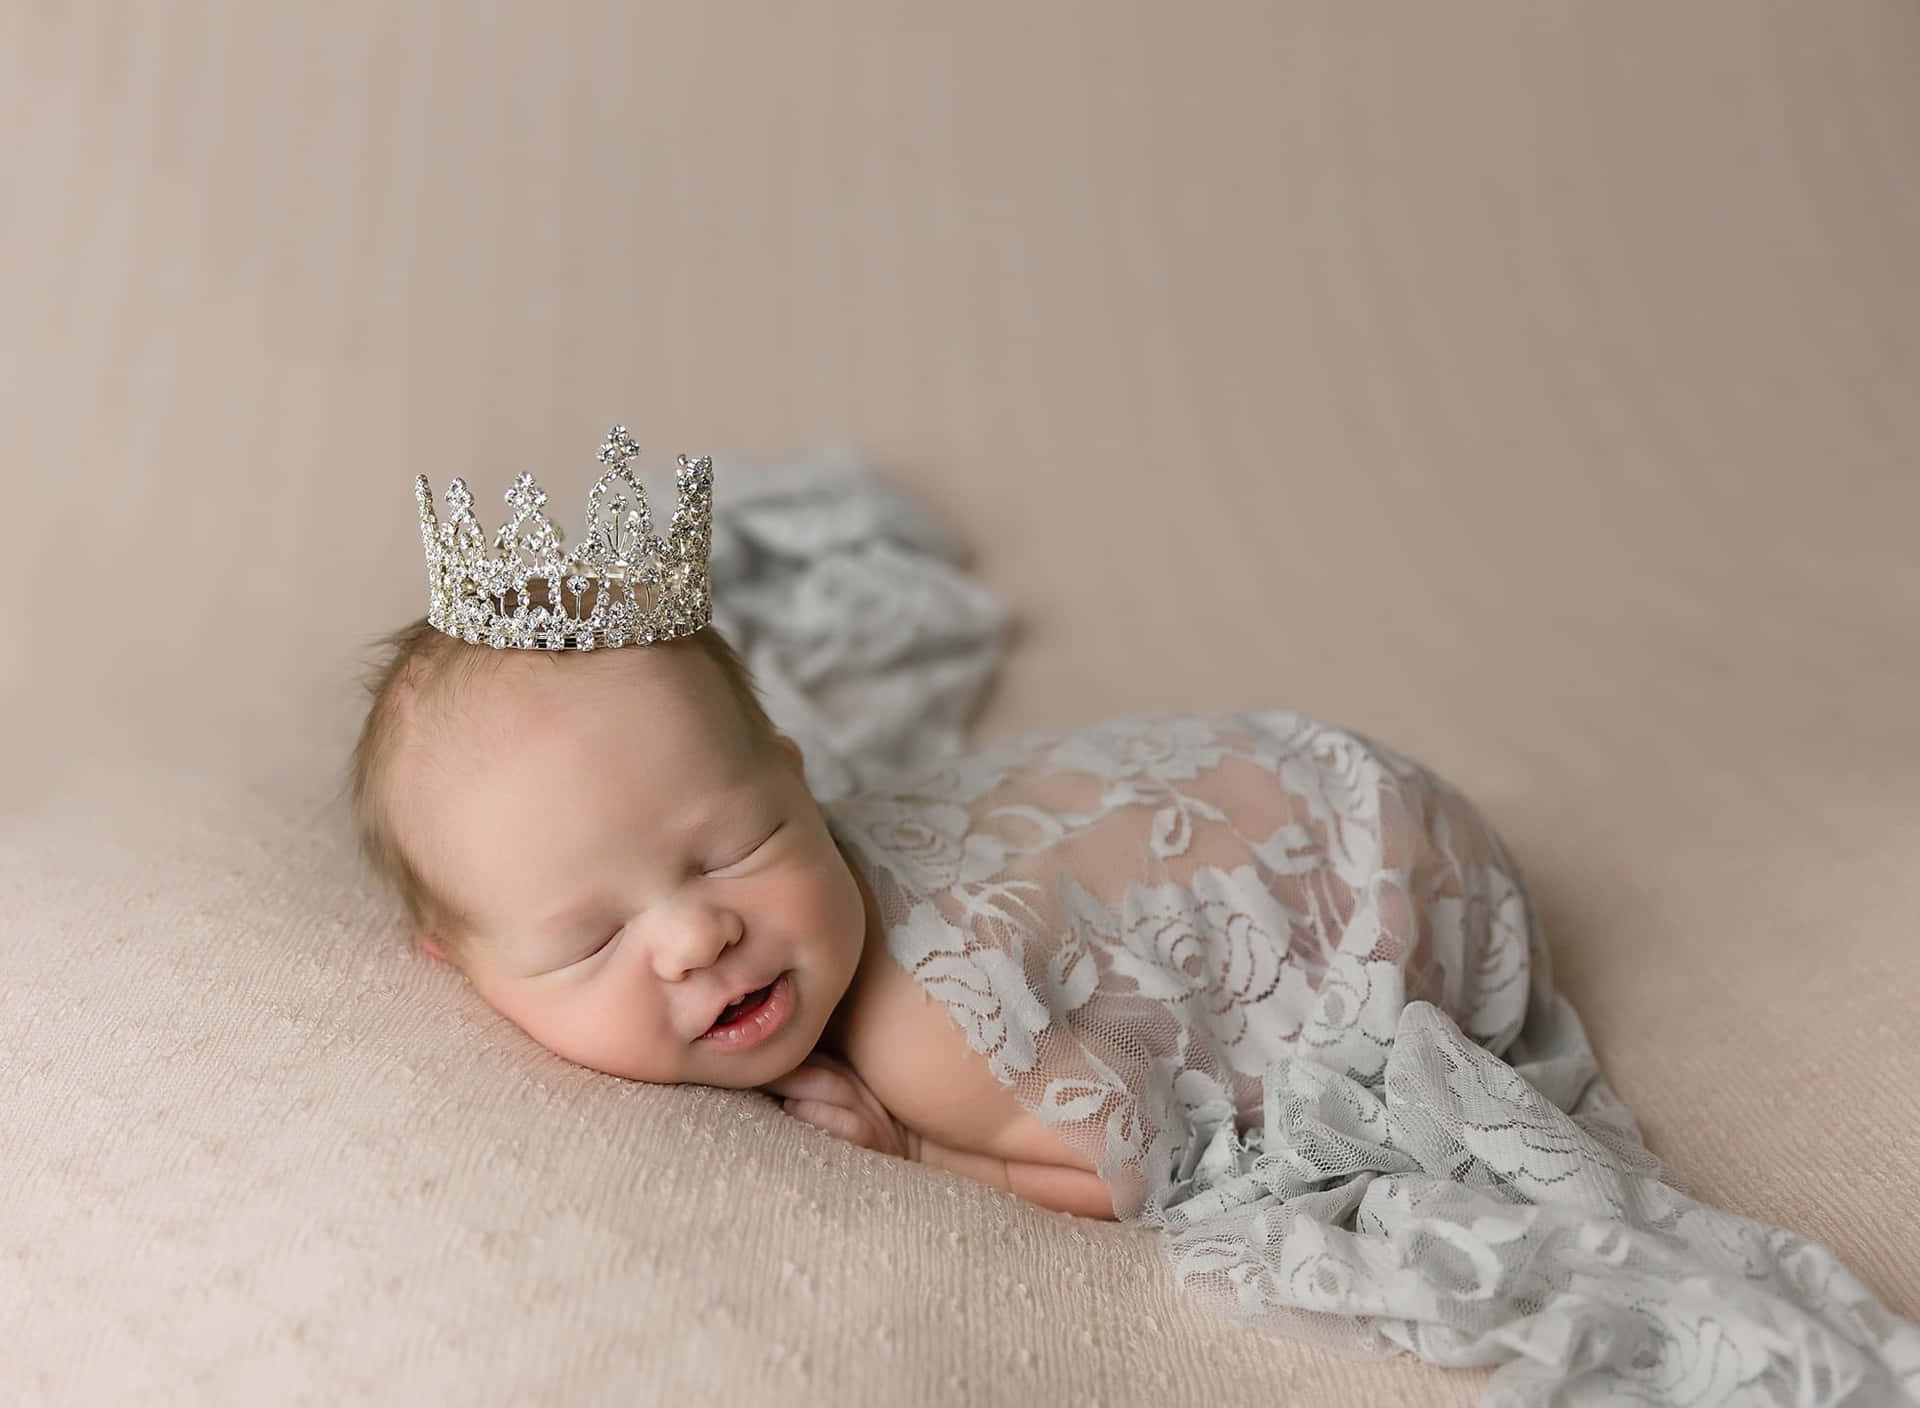 A Baby Girl Wearing A Tiara While Laying On A Blanket Background